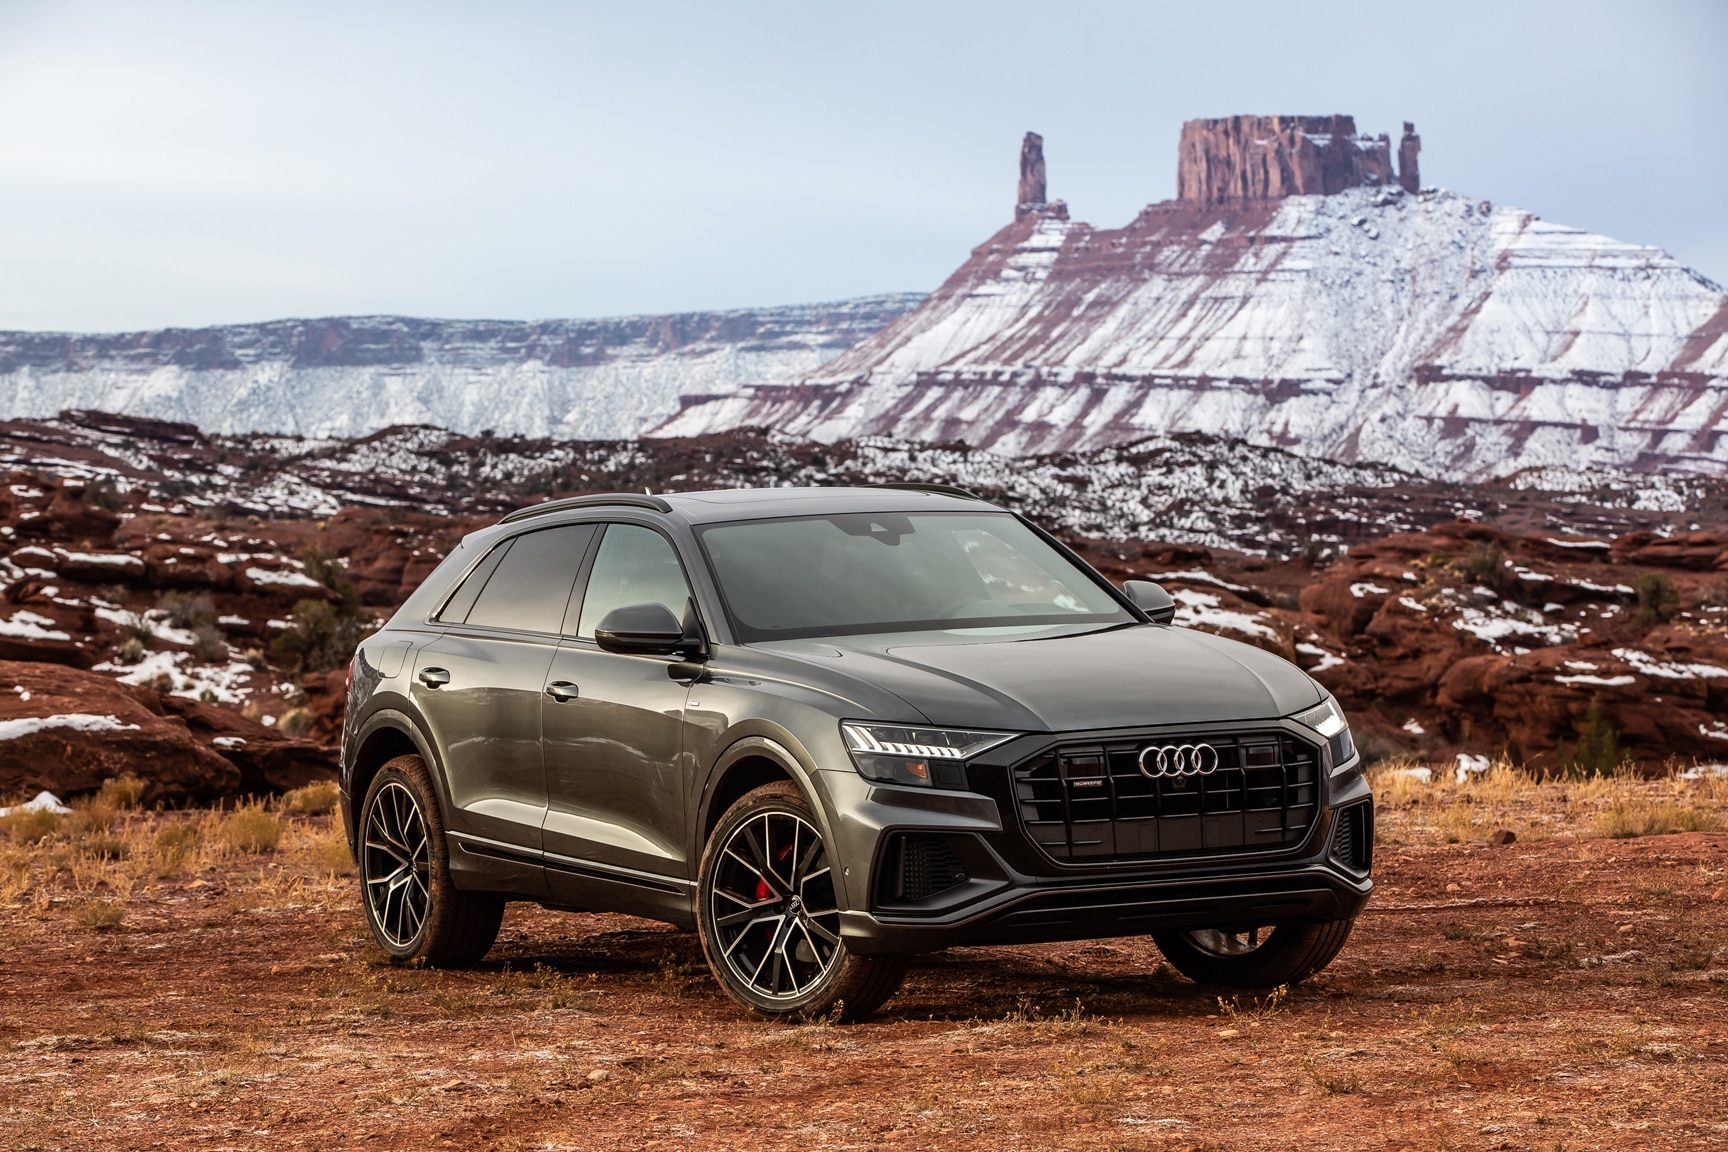 You Don’t Need to Drive the New Audi Q8 to Understand It